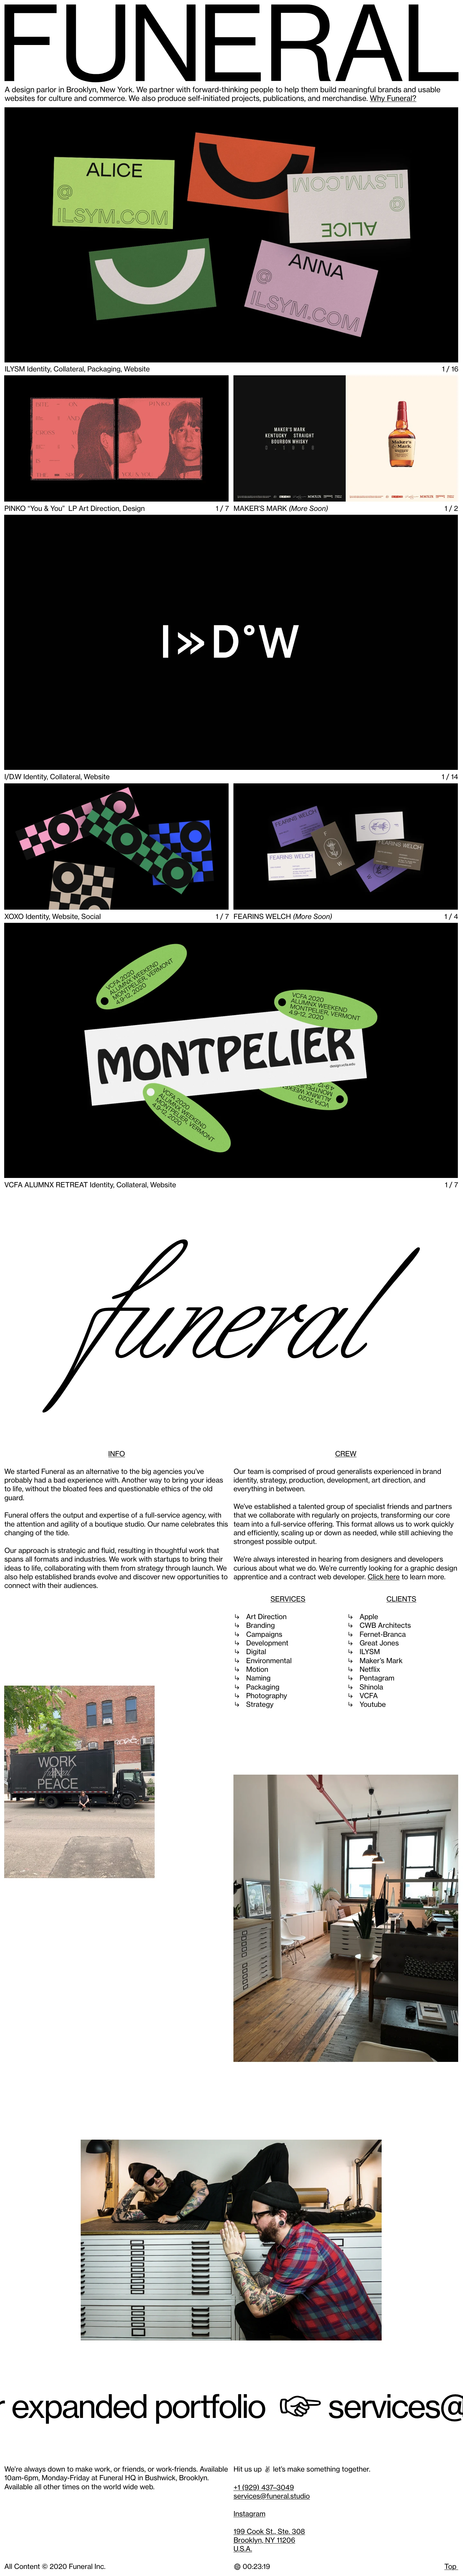 Funeral Landing Page Example: Funeral is a design parlor in Brooklyn, New York. We partner with forward-thinking clients to help them build meaningful brands people love.